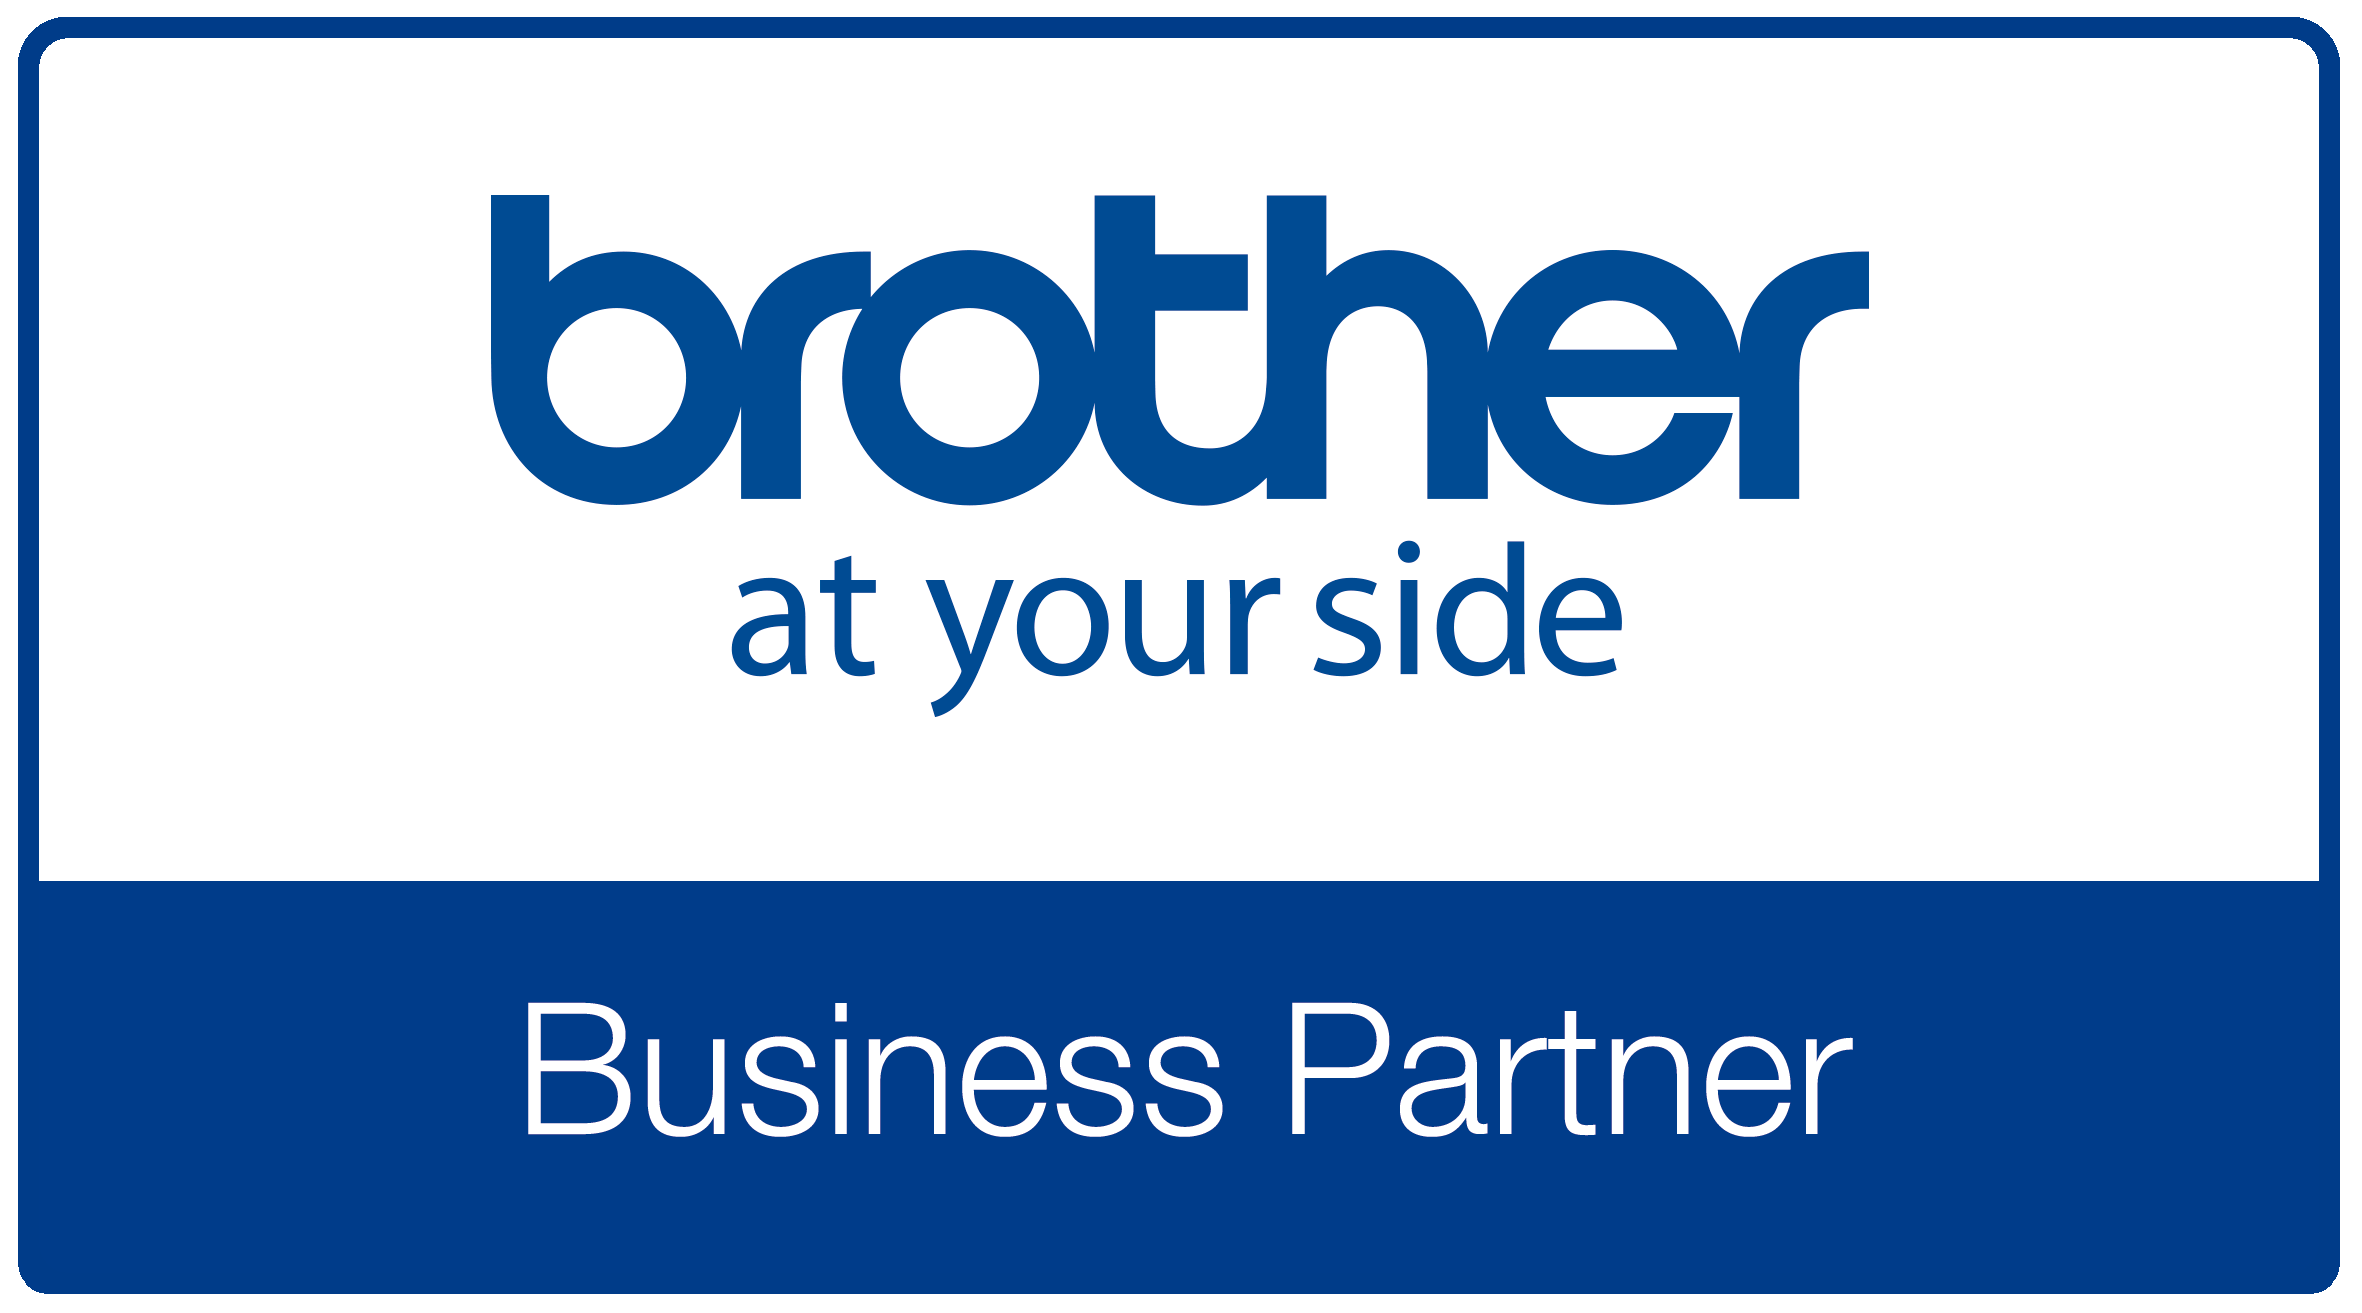 Brother Business Partner